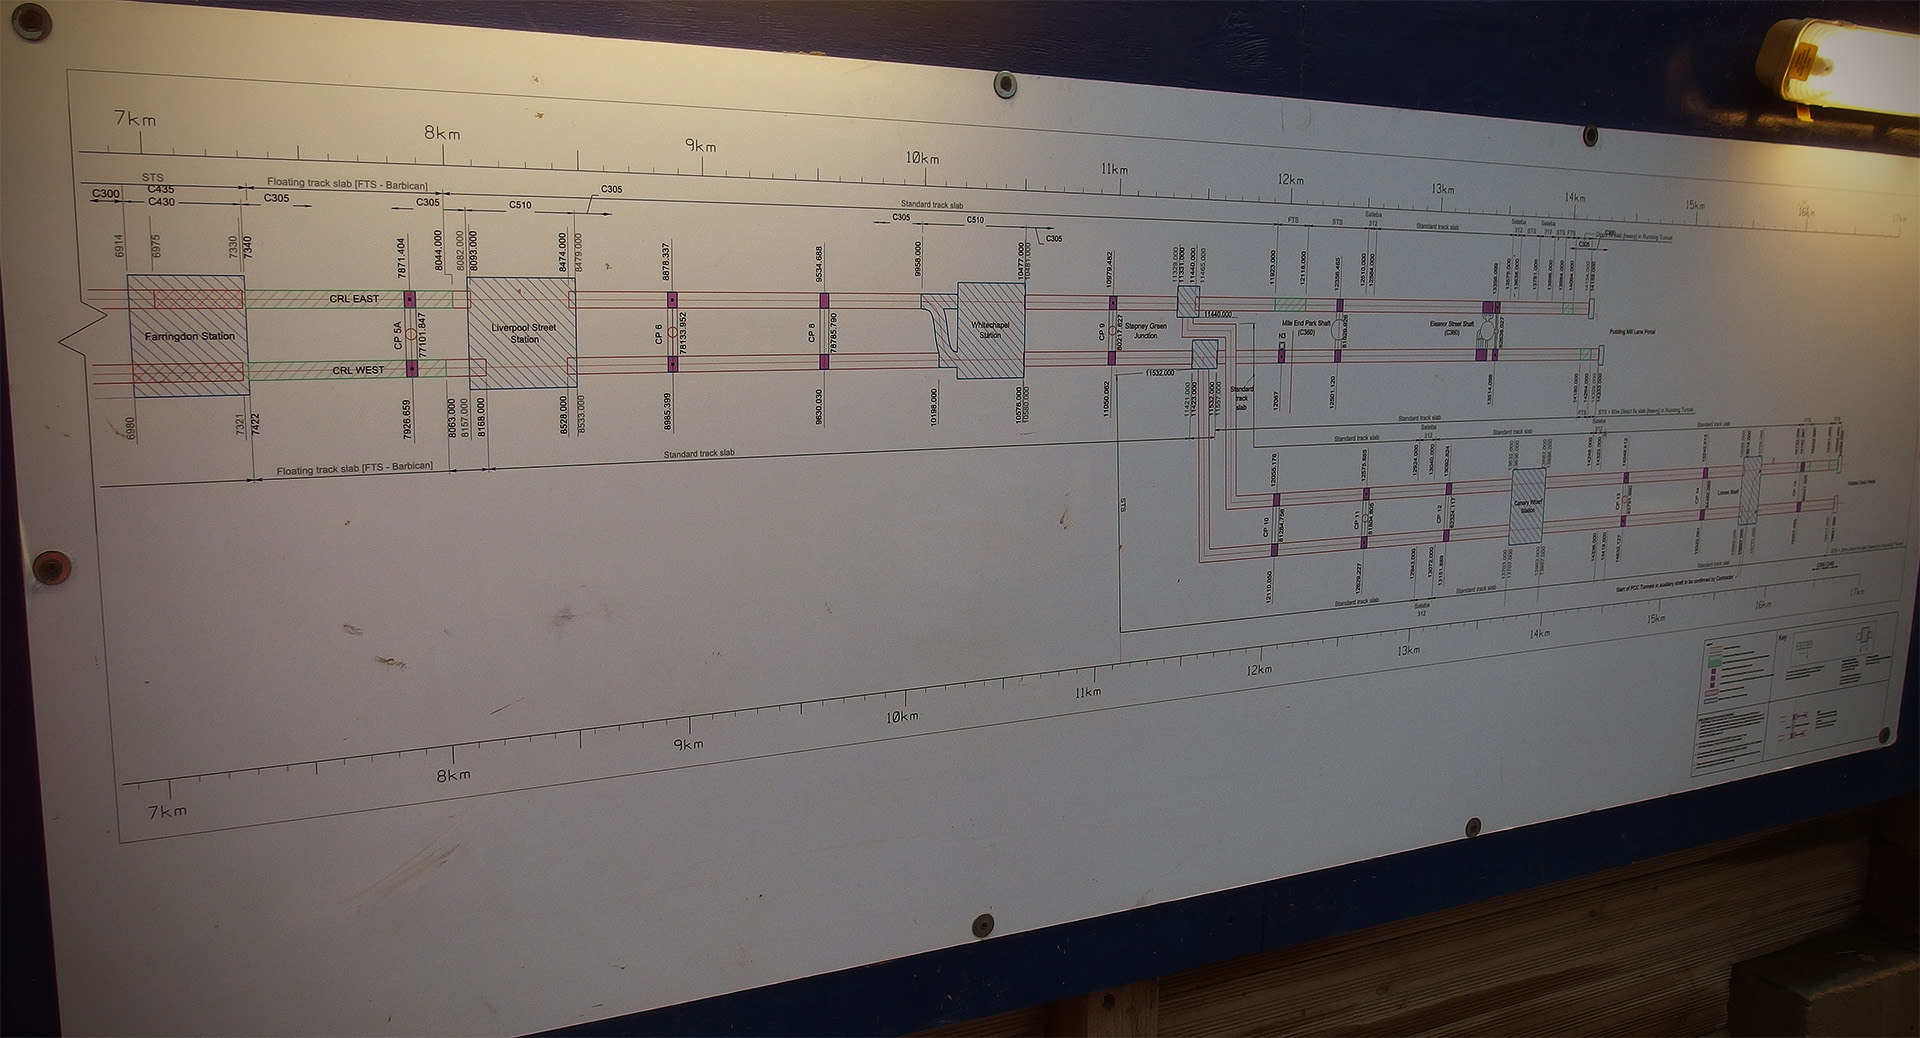 A schematic map is mounted on hoardings